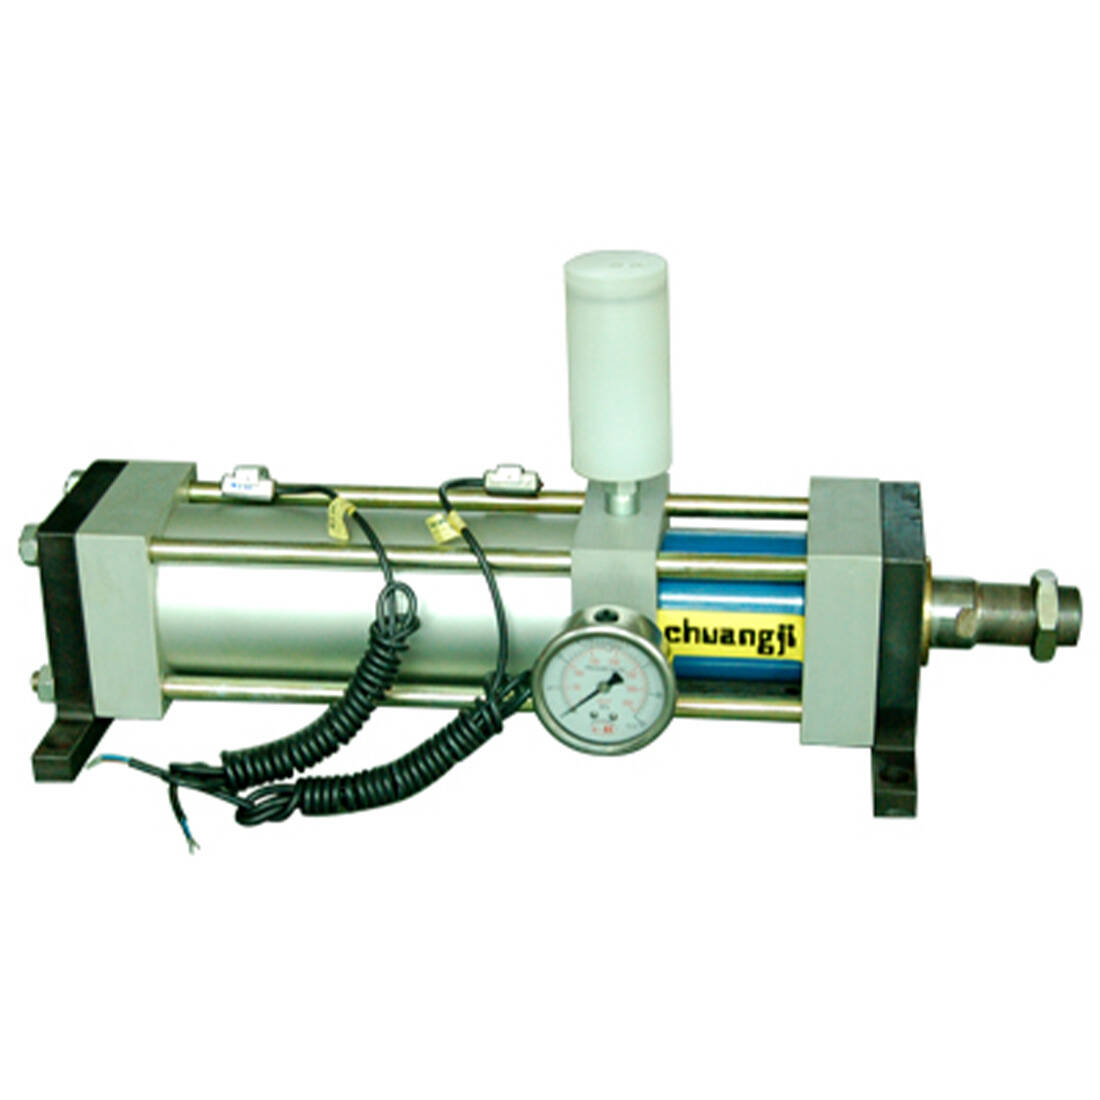 MPTC-5T Direct Pressure Booster Cylinder